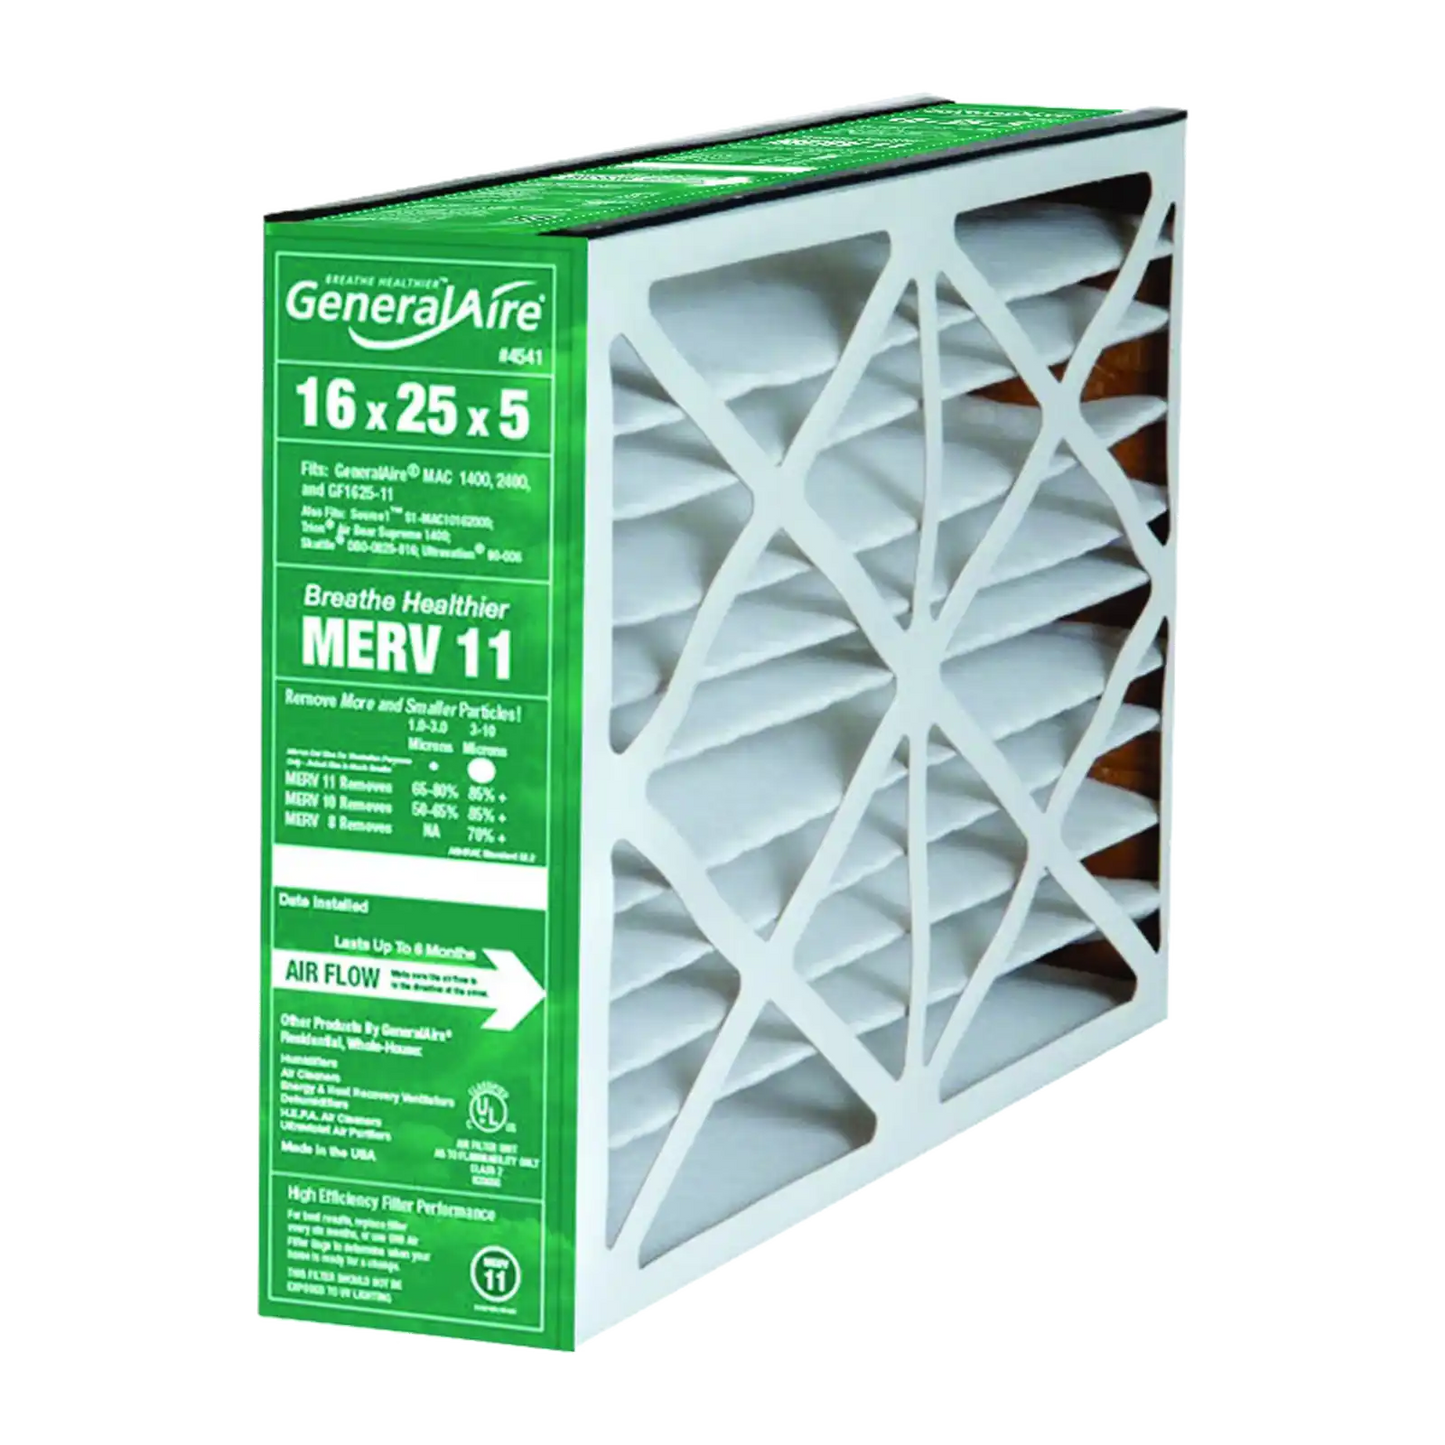 GeneralAire ReservePro 4541 16x25x5 Furnace Filter